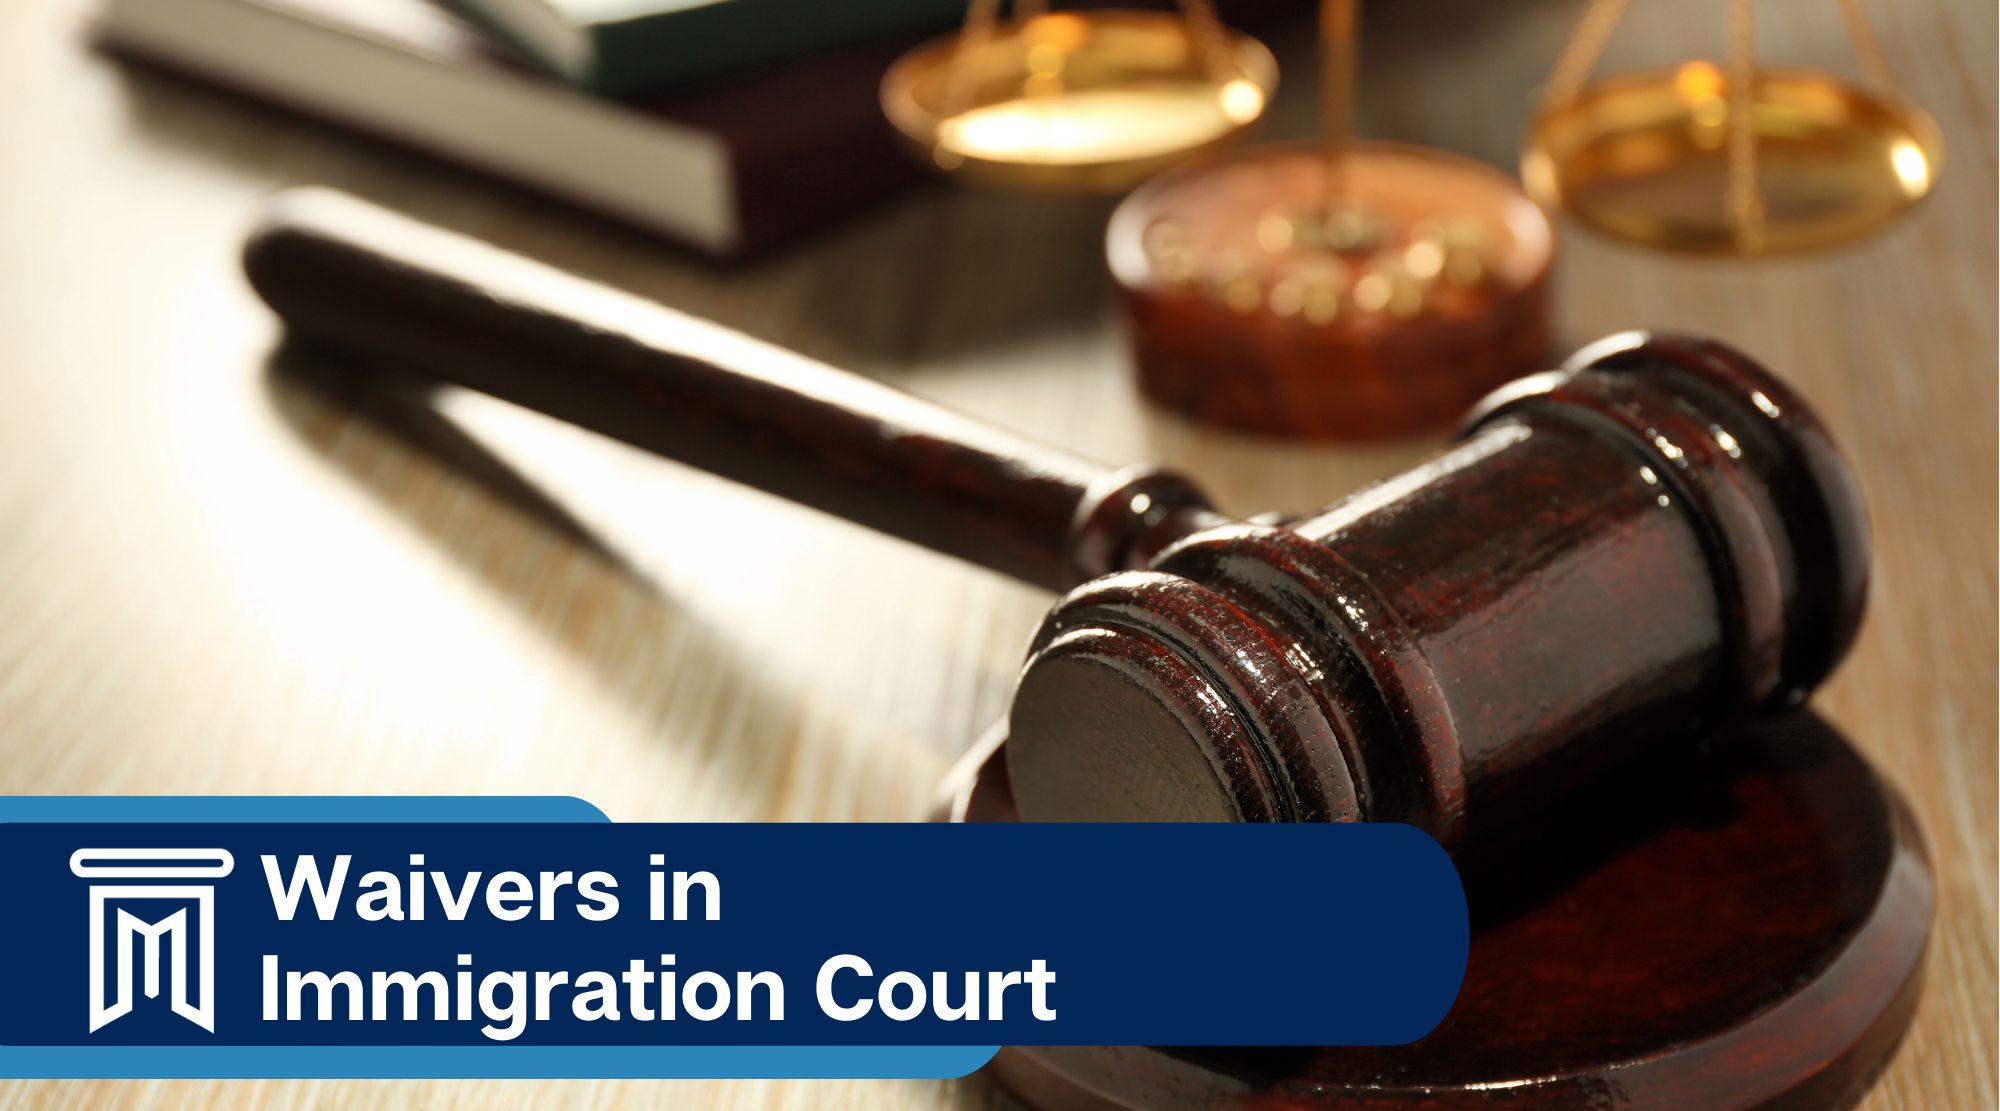 Waivers in Immigration Court